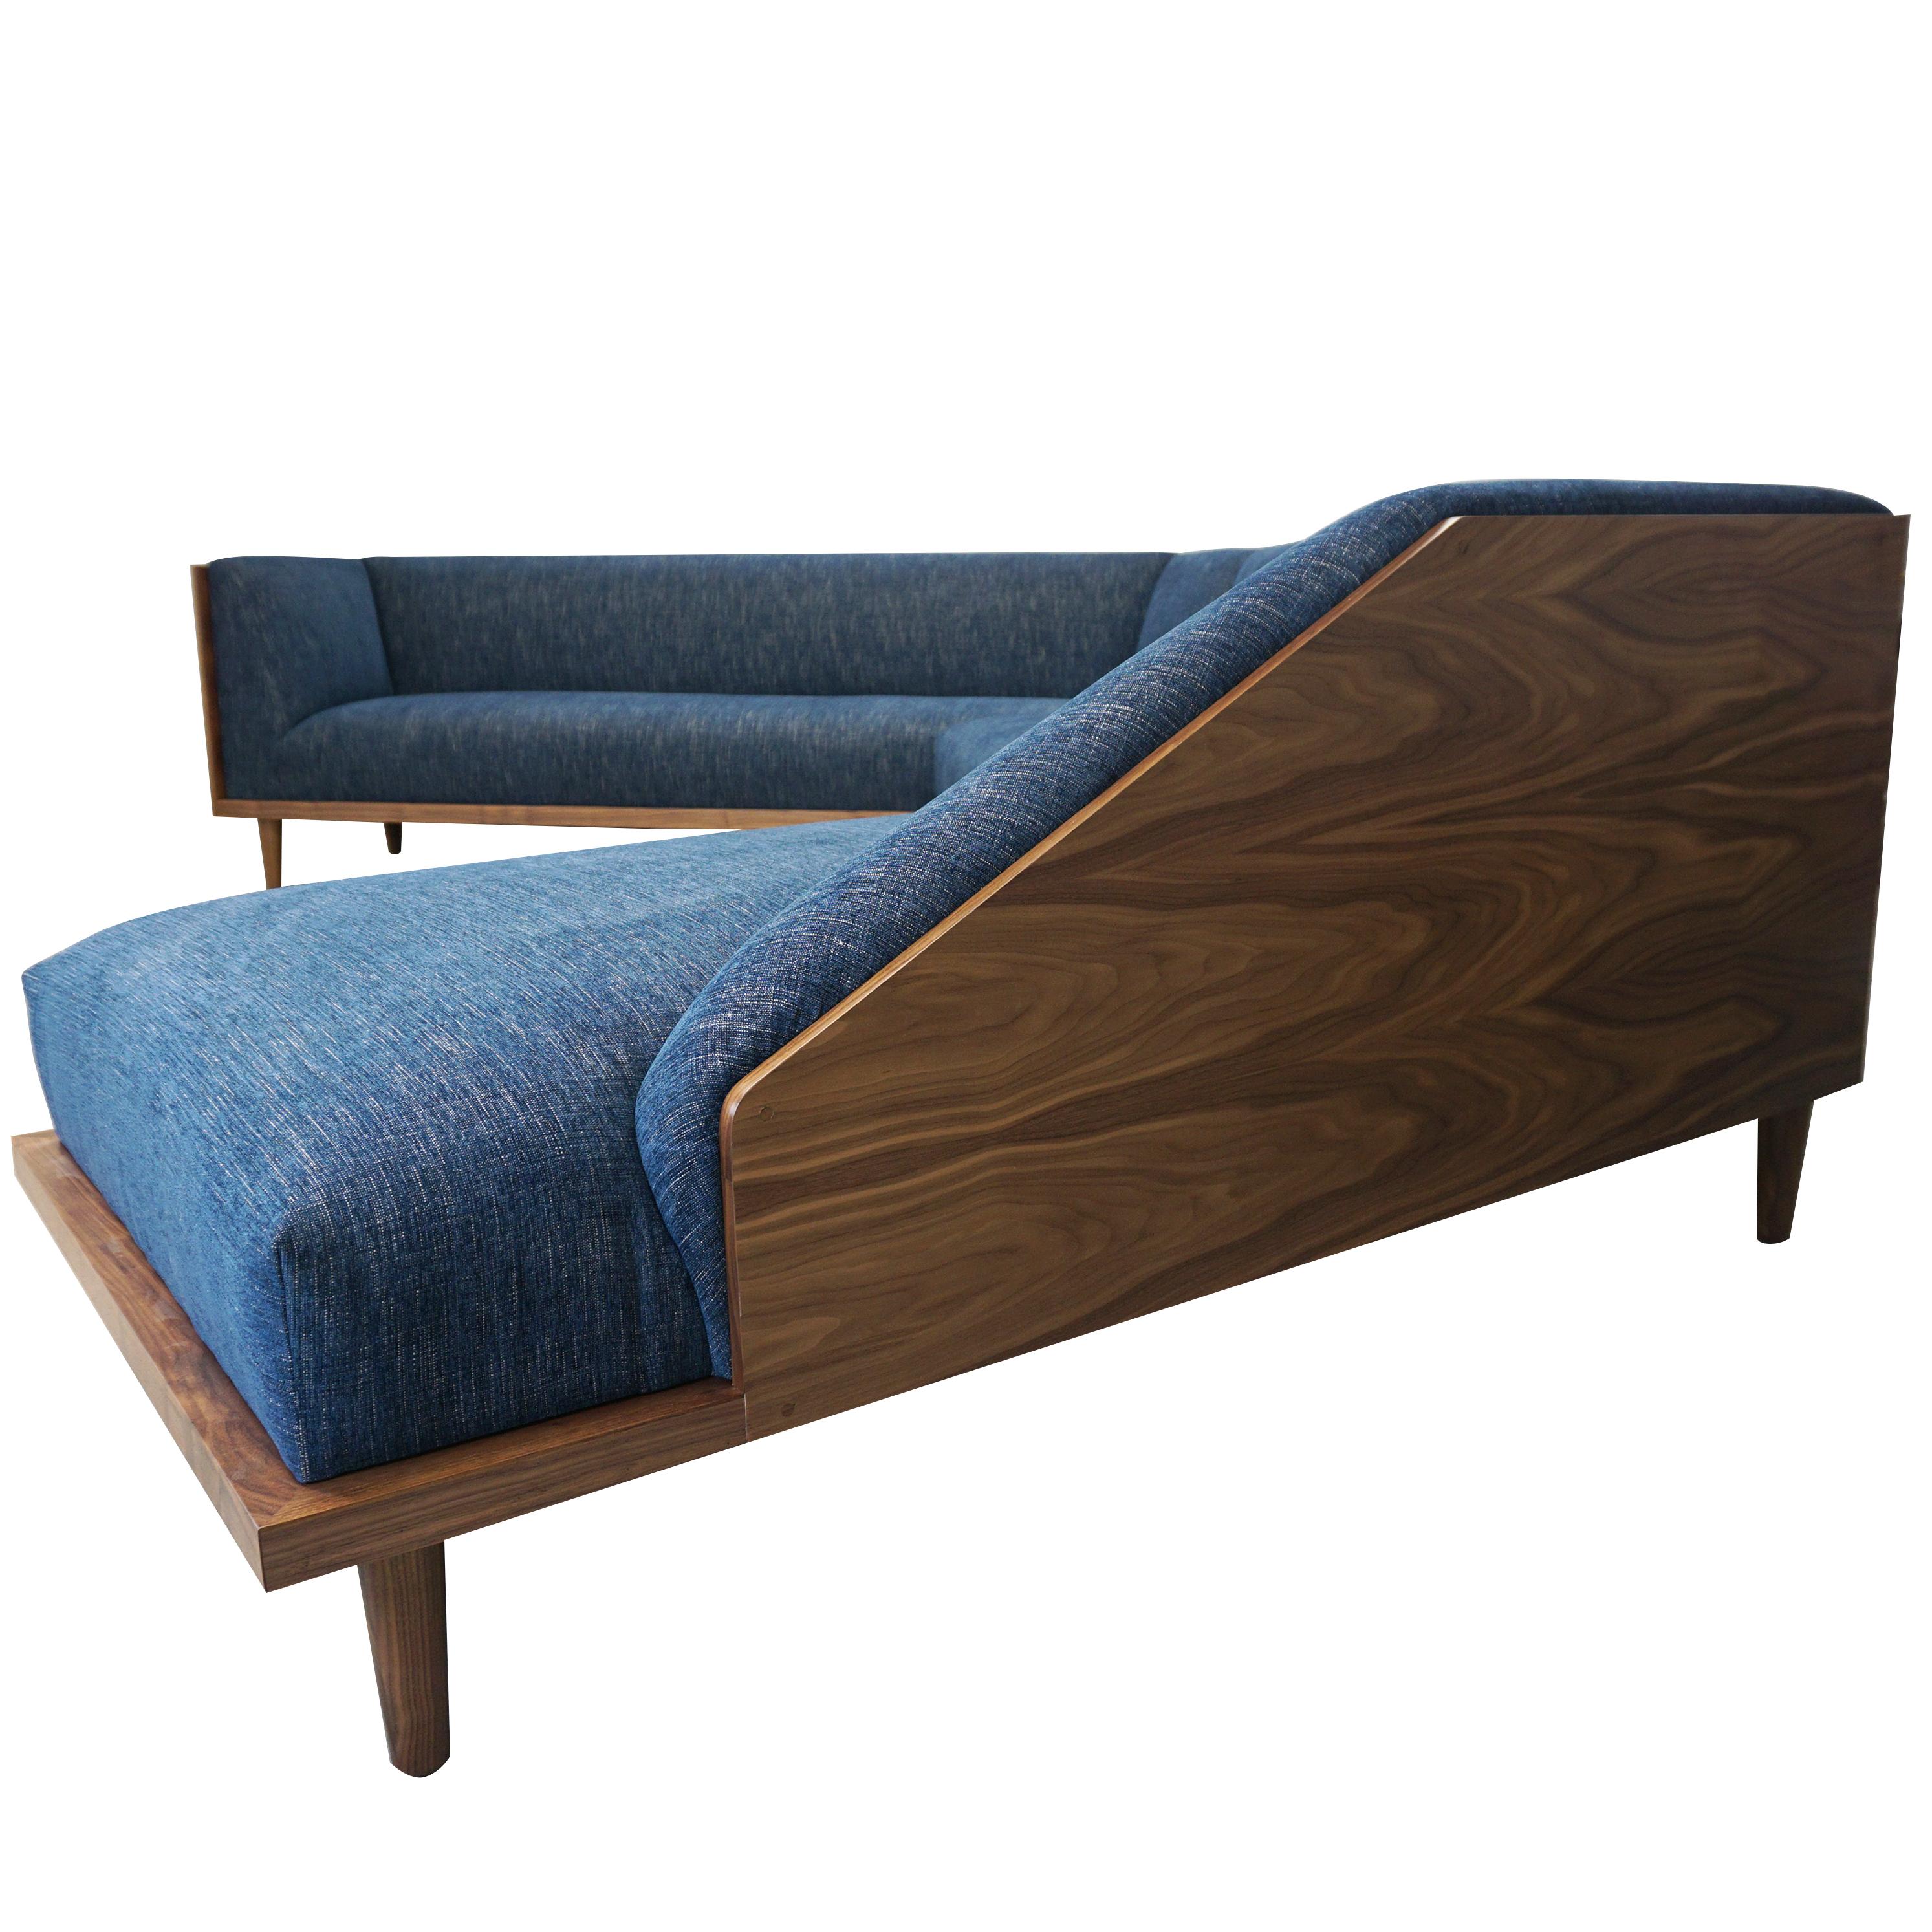 About This Piece
This customizable sectional sofa features a modern solid walnut frame with two solid walnut panels on the return ends, tight seat and back cushions and blind tuft detail along the outside back. Walnut can be replaced with oak,